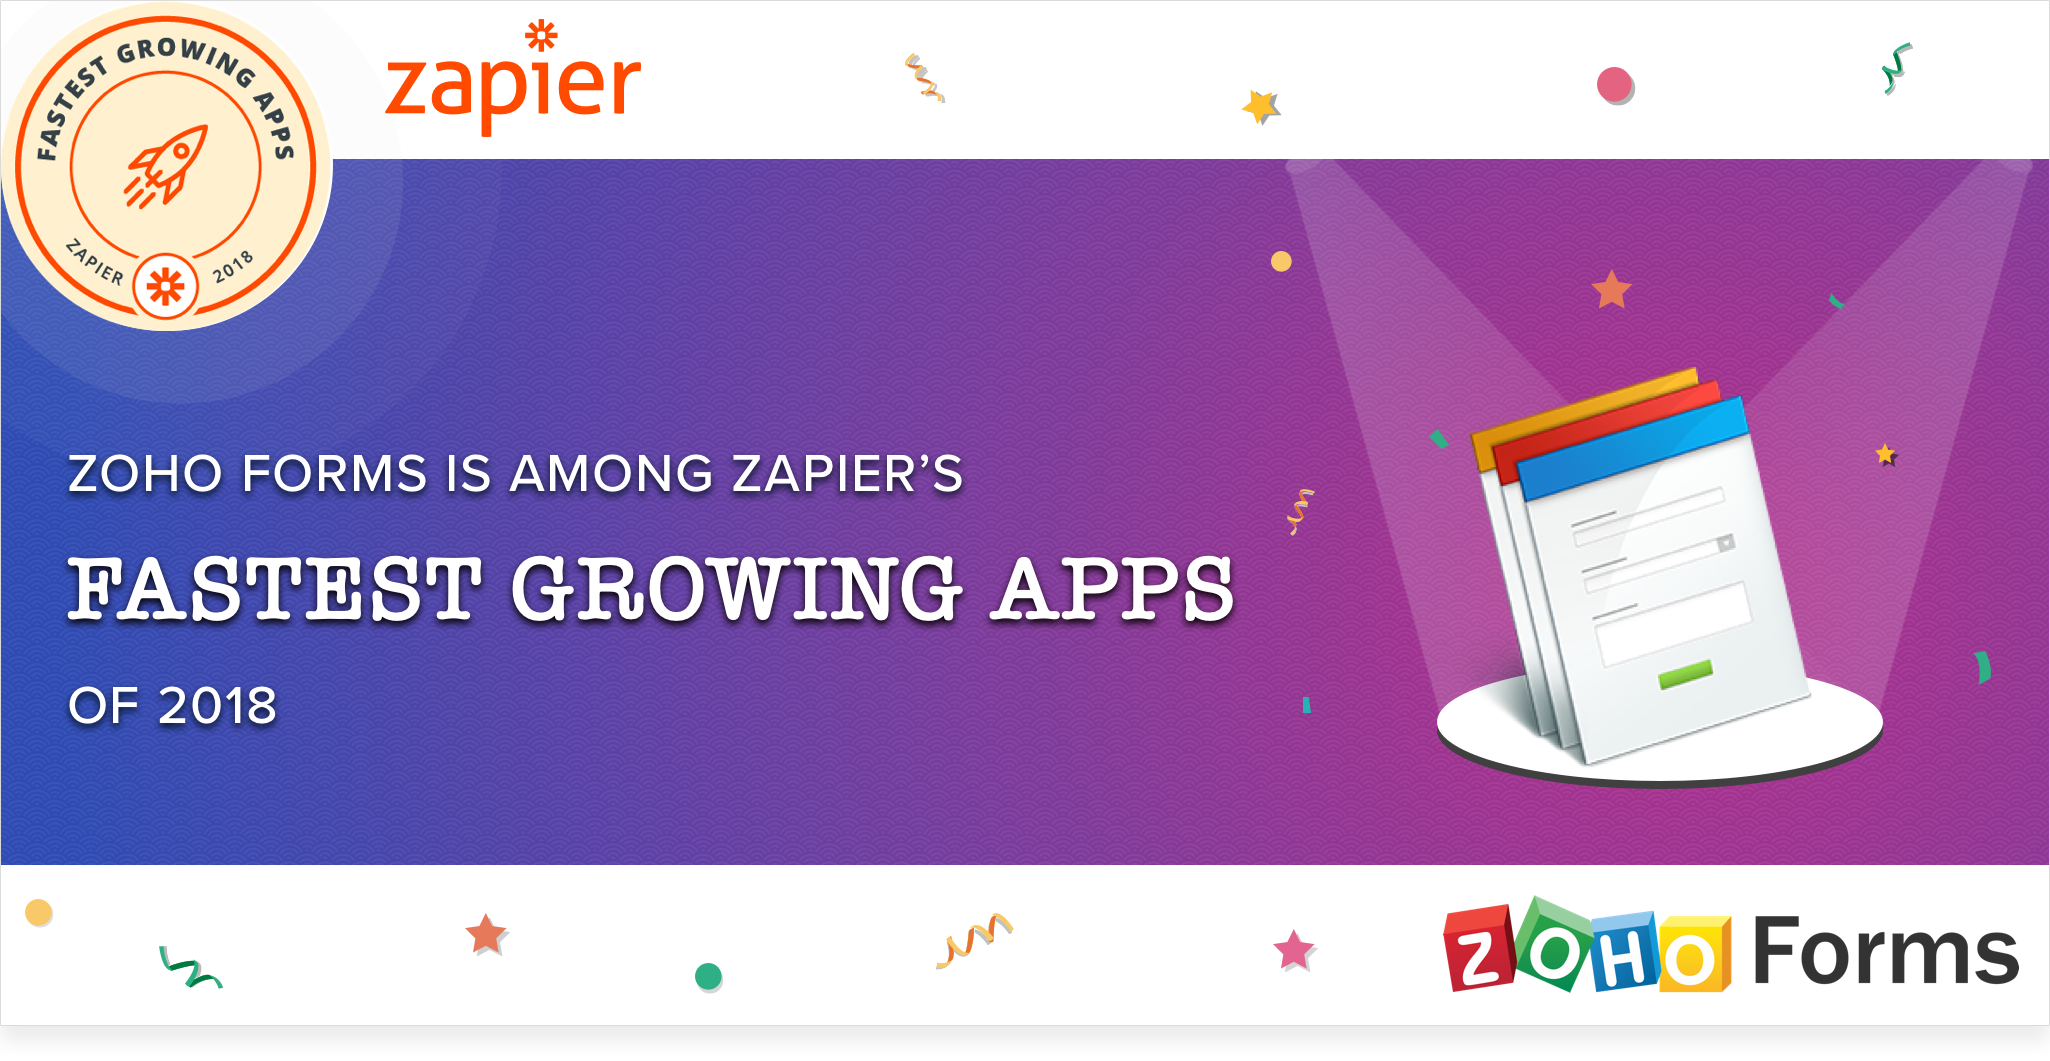 Zoho Forms is among Zapier's fastest growing apps of 2018